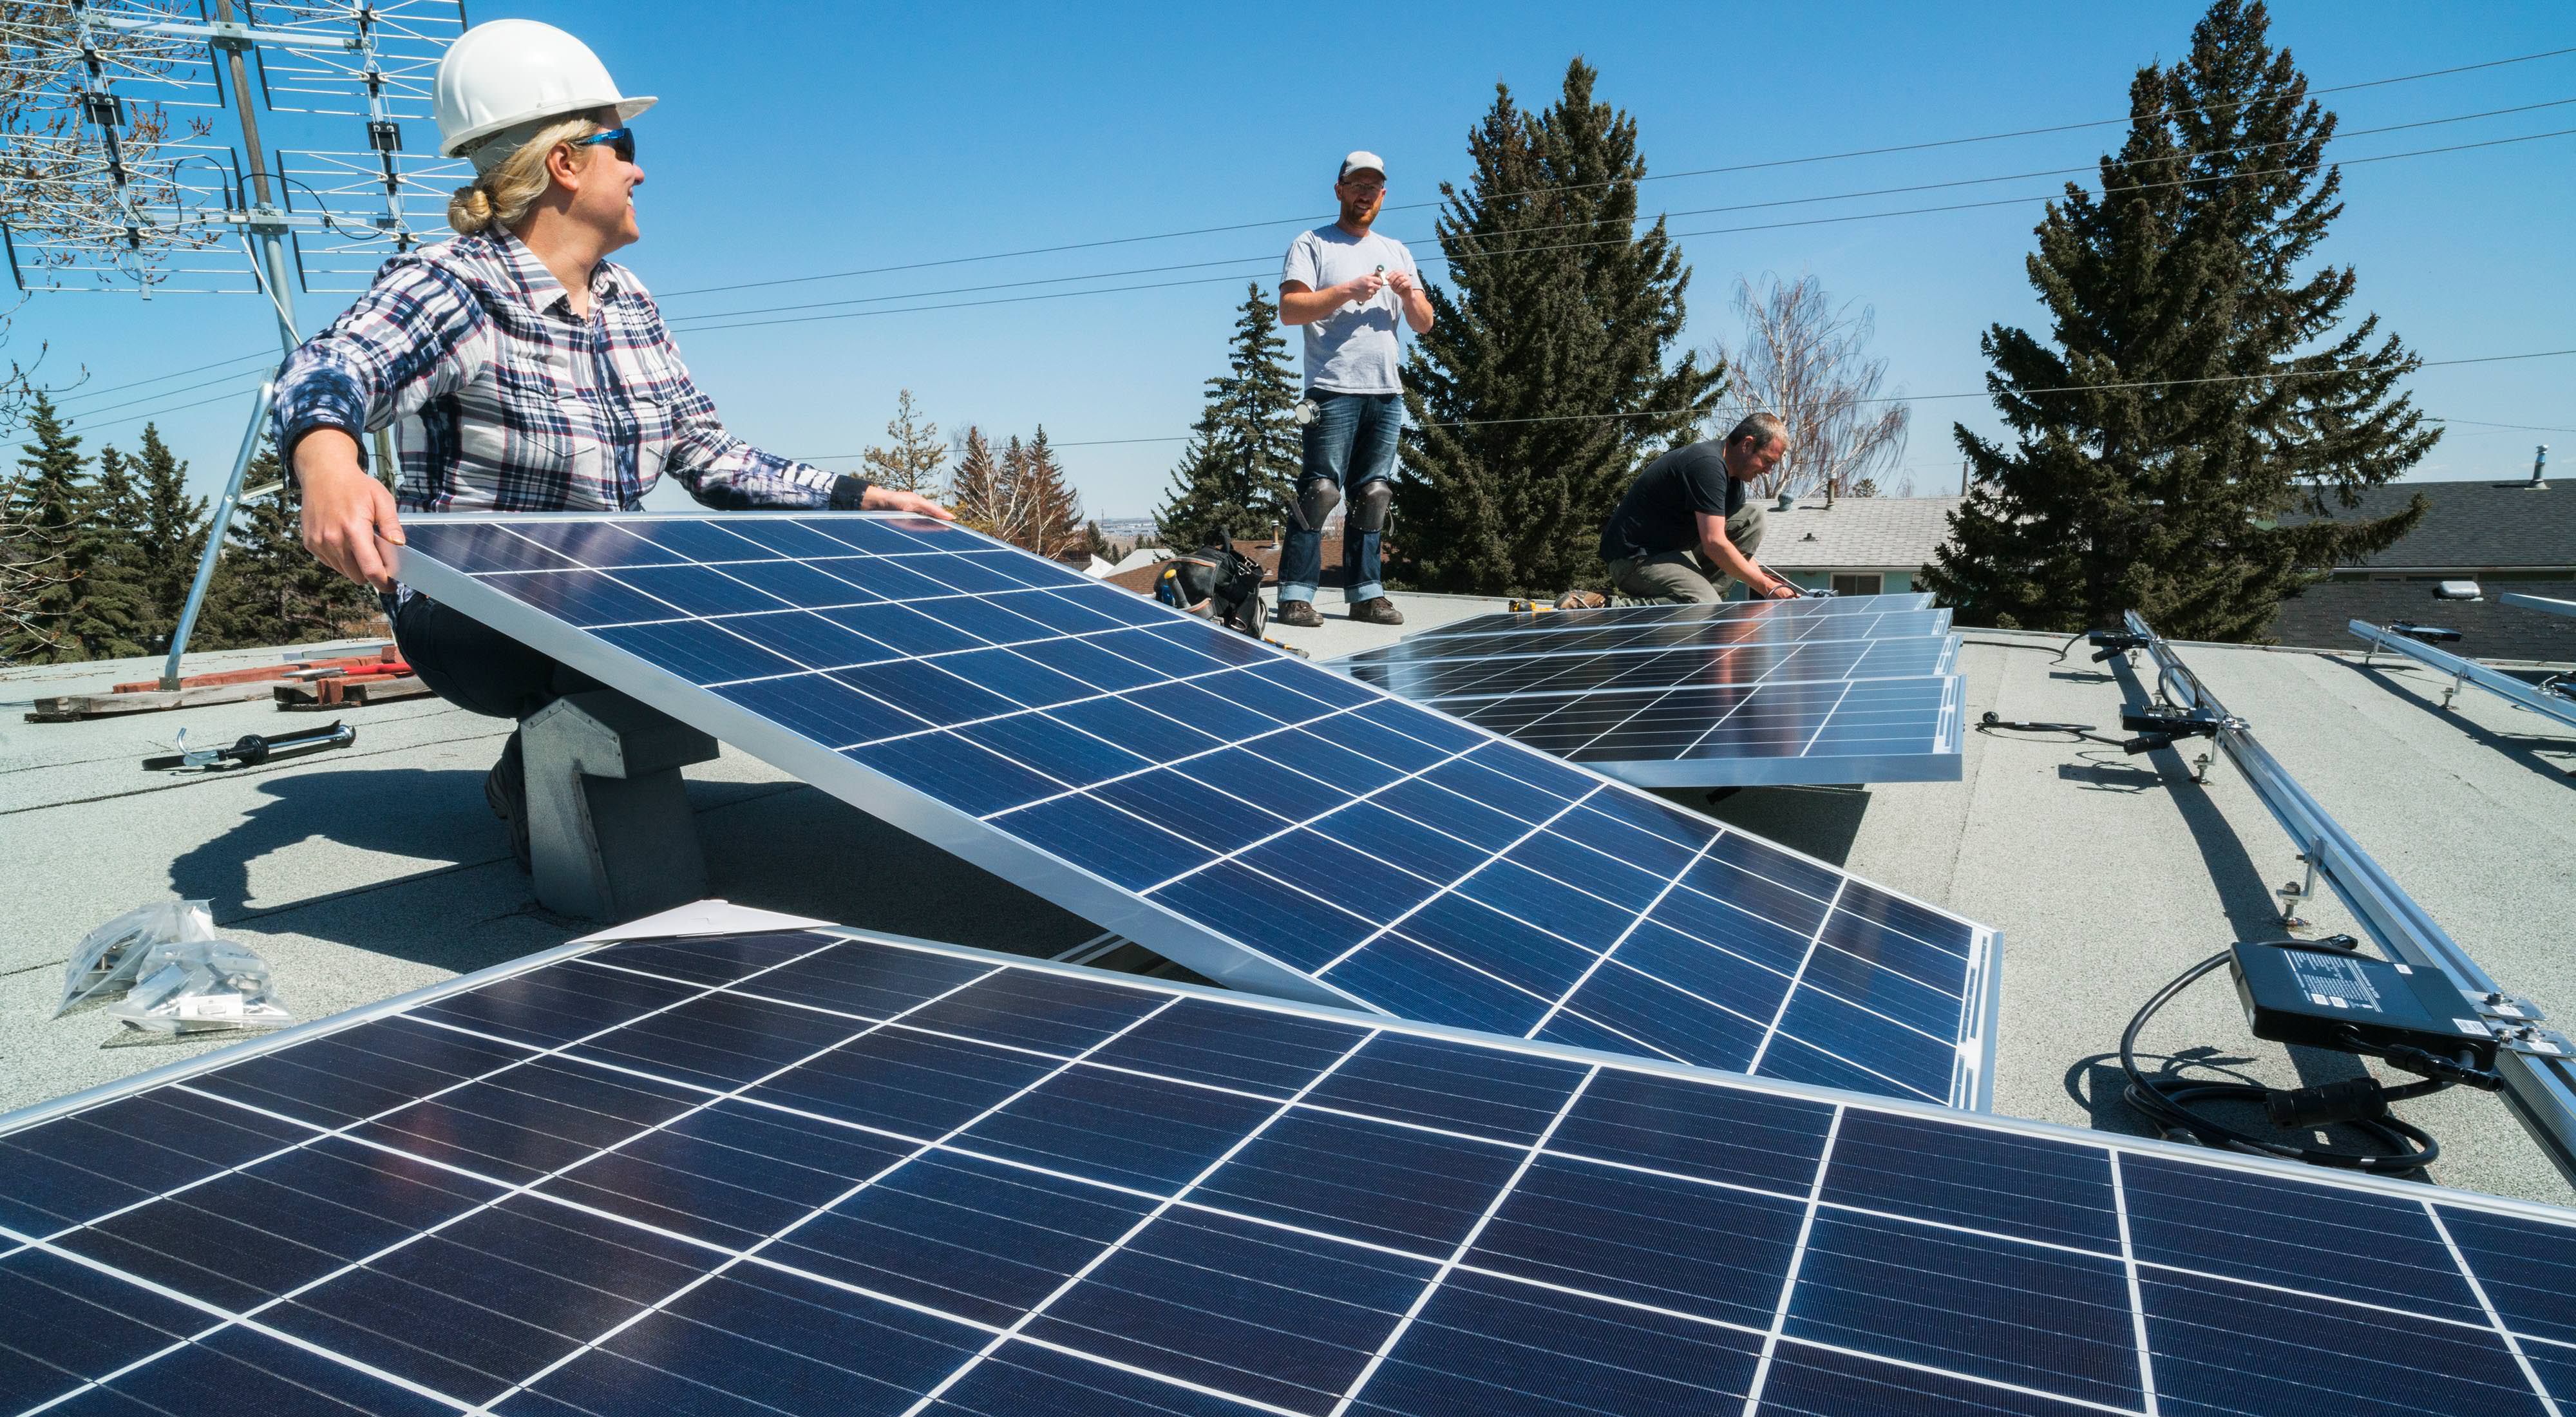 Workers installing solar panels on a roof.